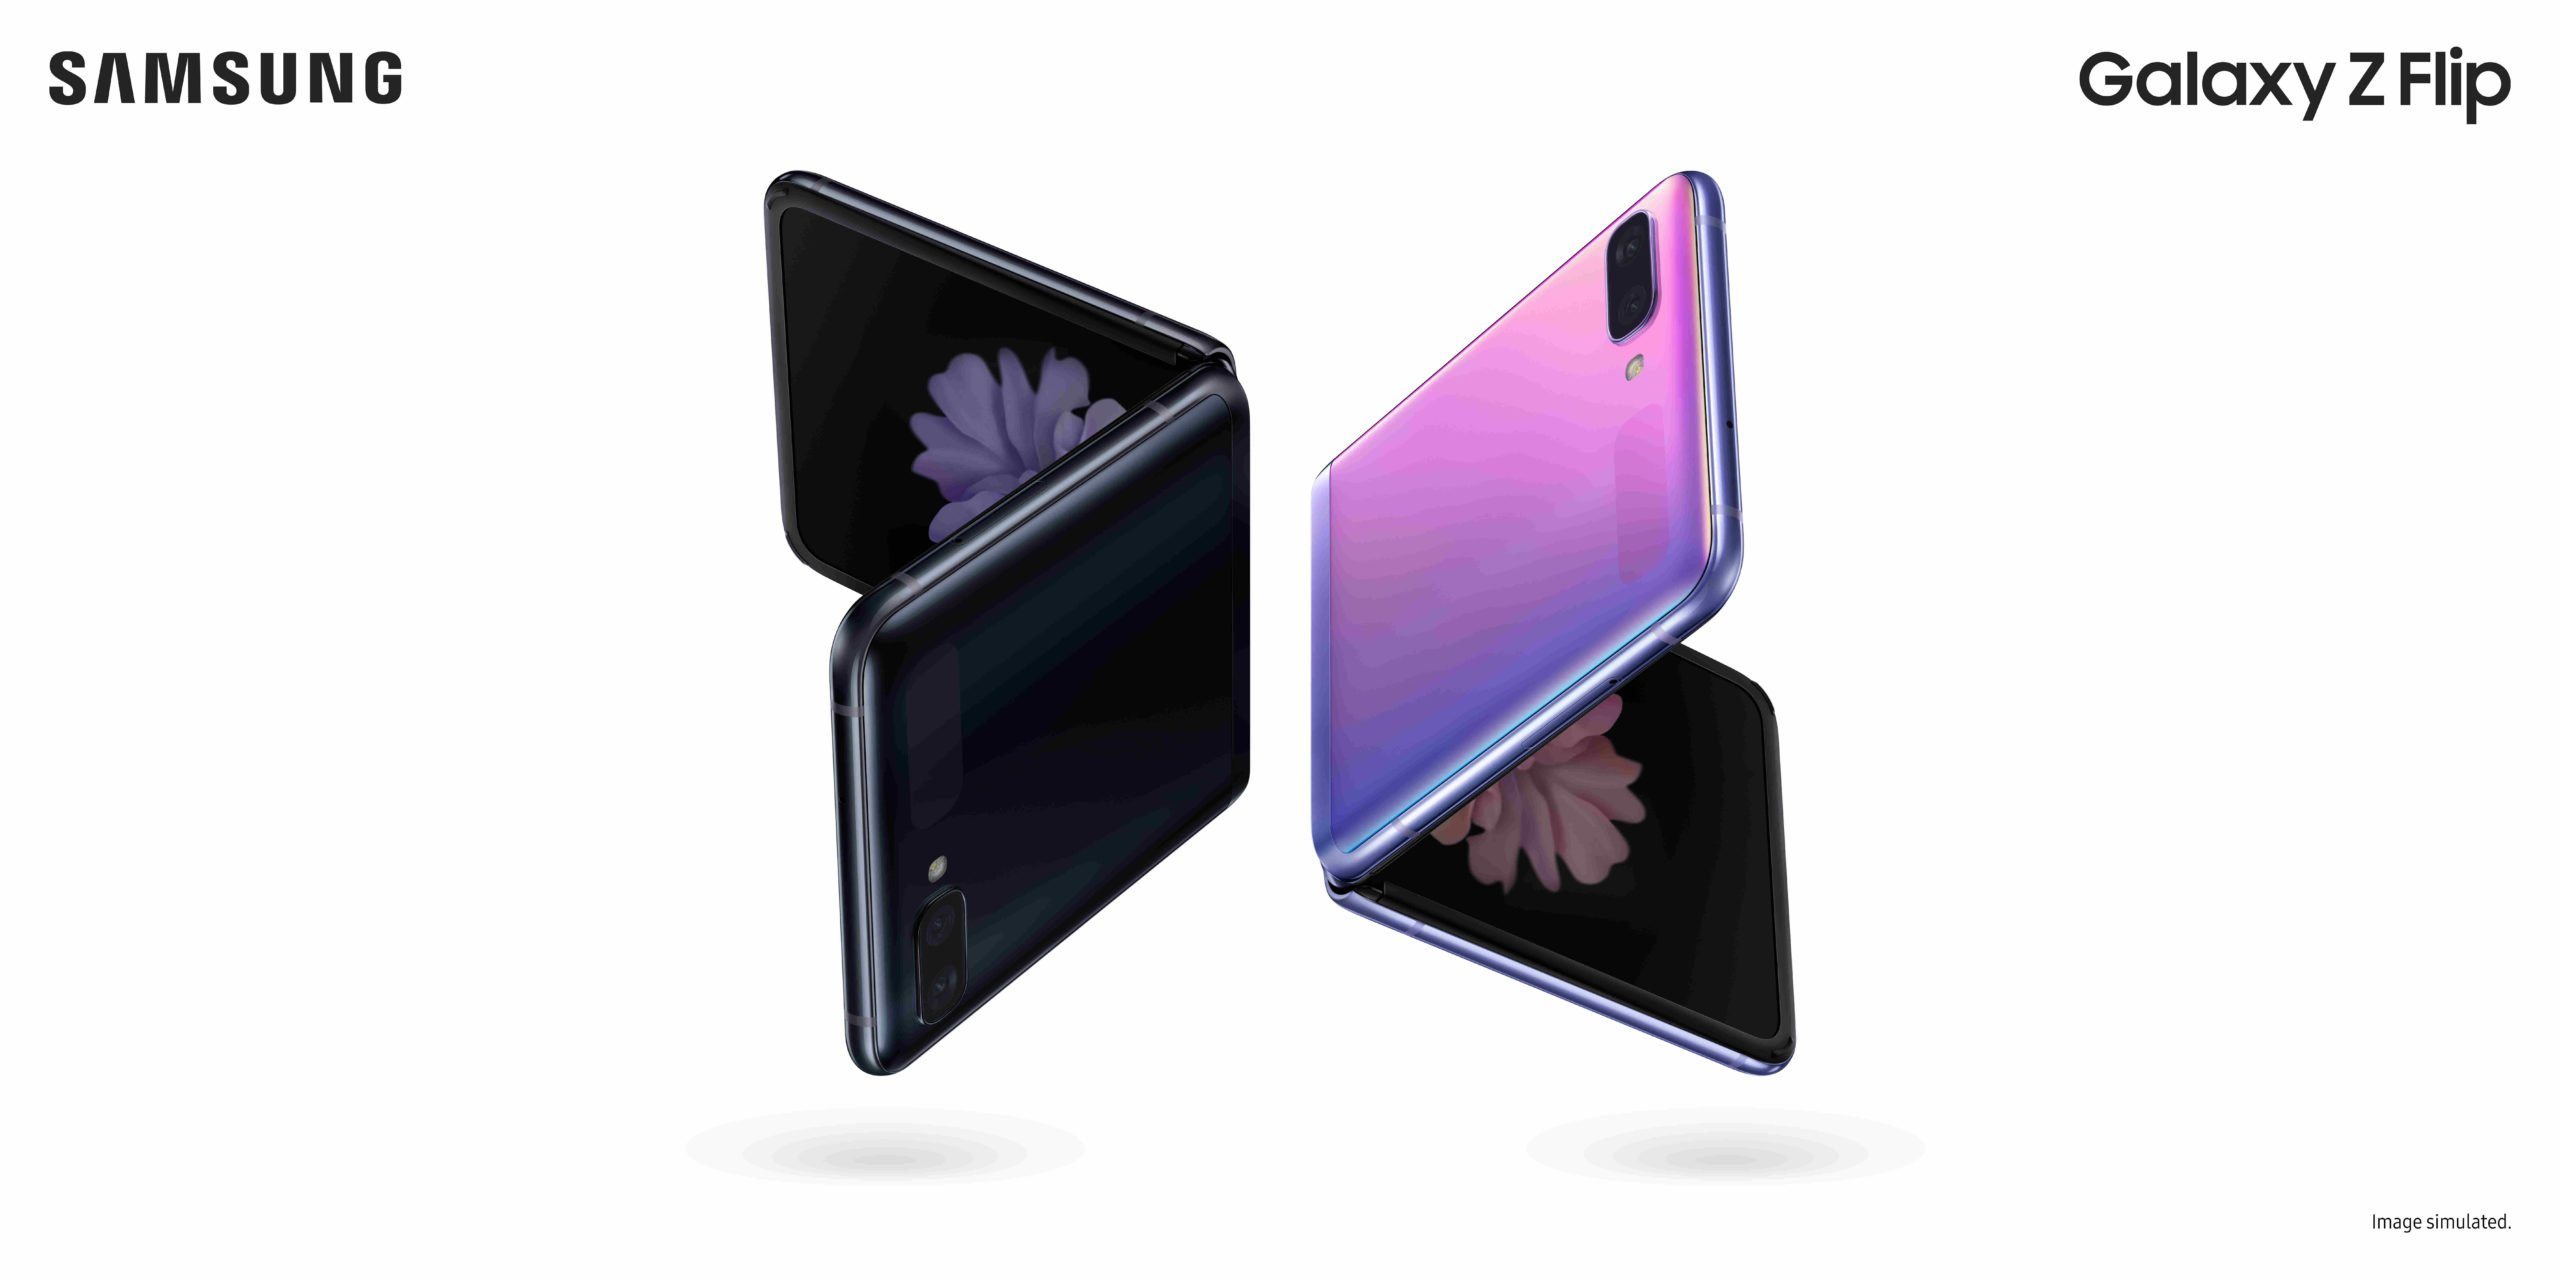 The Galaxy Z Flip Will Be Available In Canada In Limited Quantities In Both Mirror Purple And Mirror Black. It Will Be Available Starting On February 21, 2020, For $1,819.99.